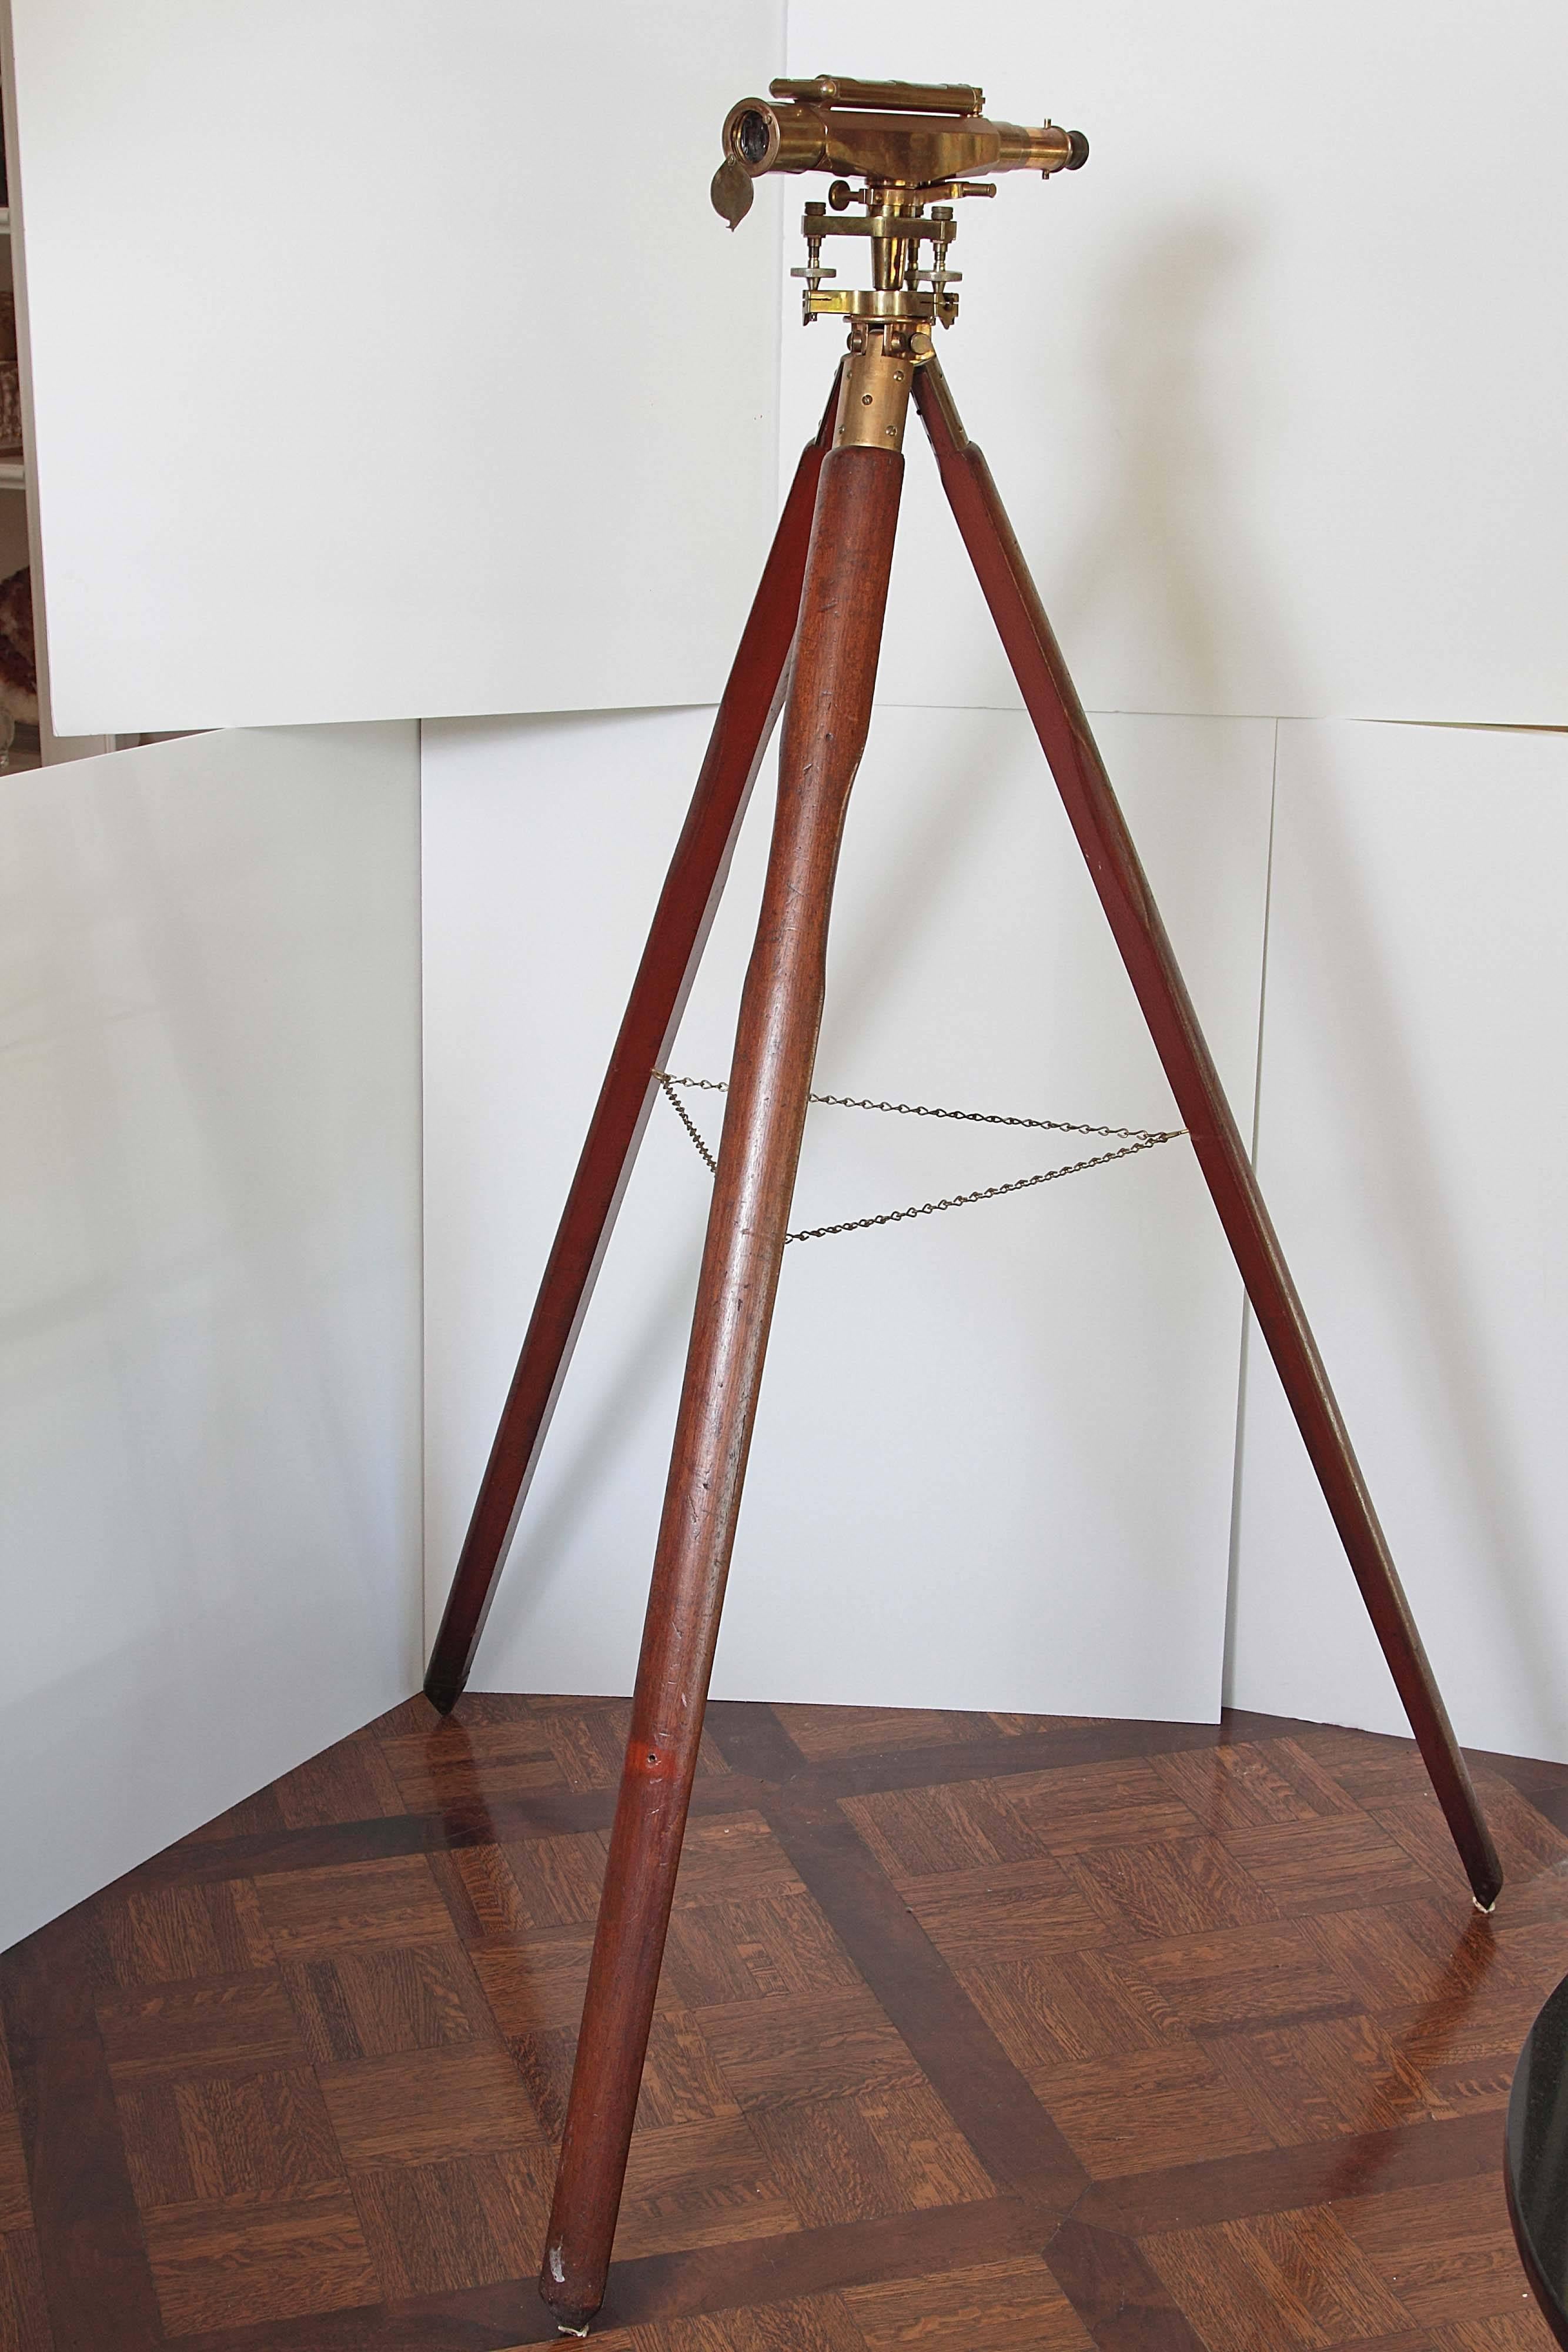 Solid brass surveyor instrument by A.G. Thornton of Manchester on wooden tripod. Trademarked Stanley London, 28750. Made in England.

Tripod measures approx. 62